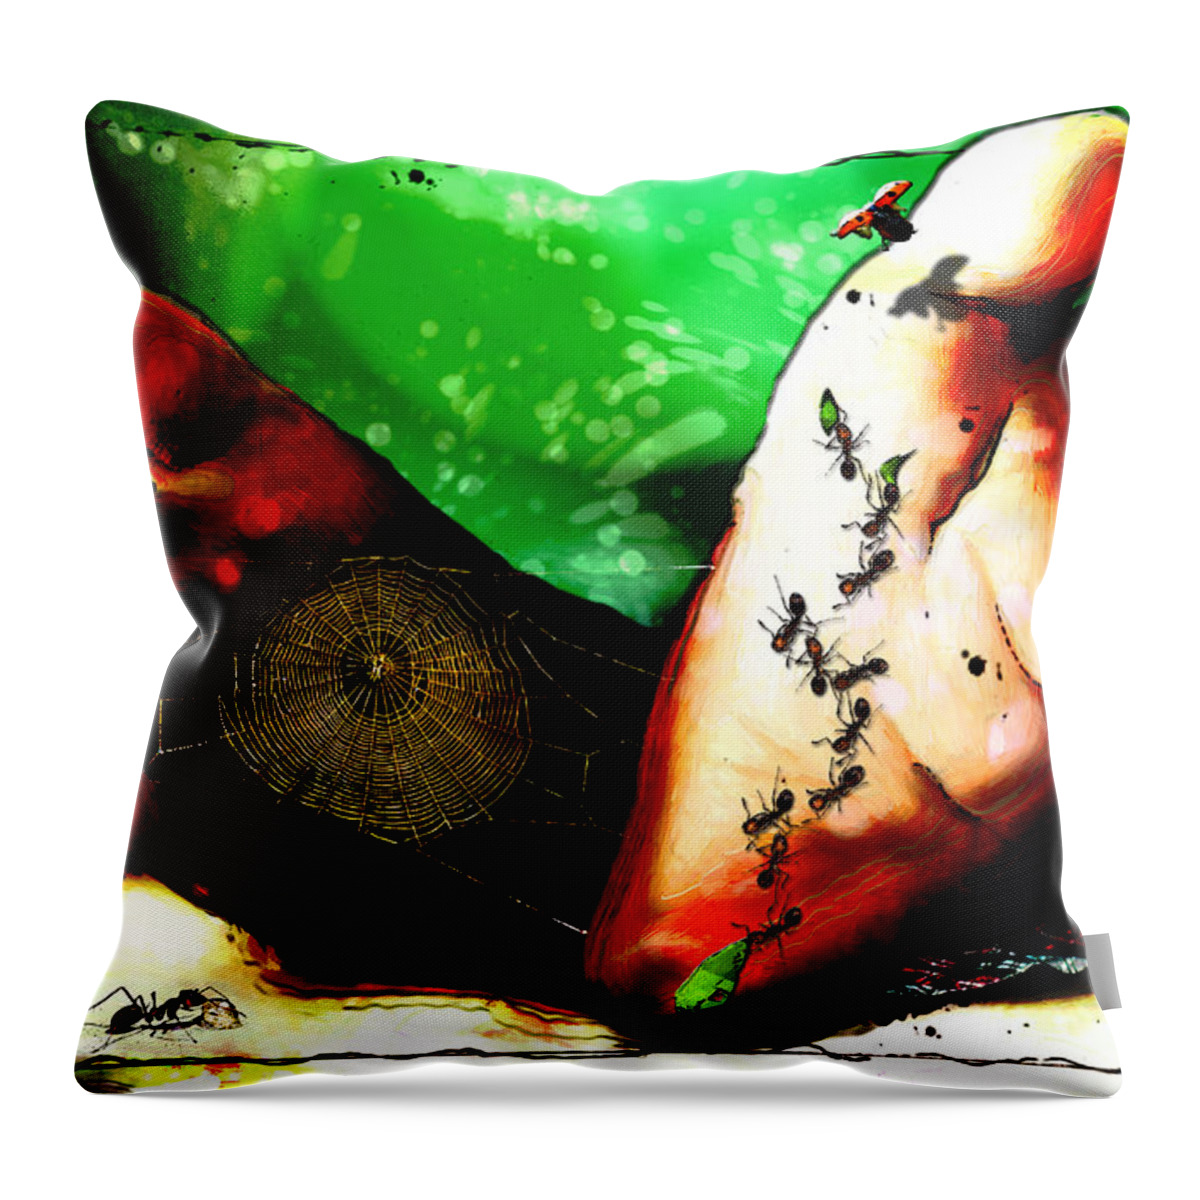 Picnic Throw Pillow featuring the painting Lazy Picnic by Adam Vance